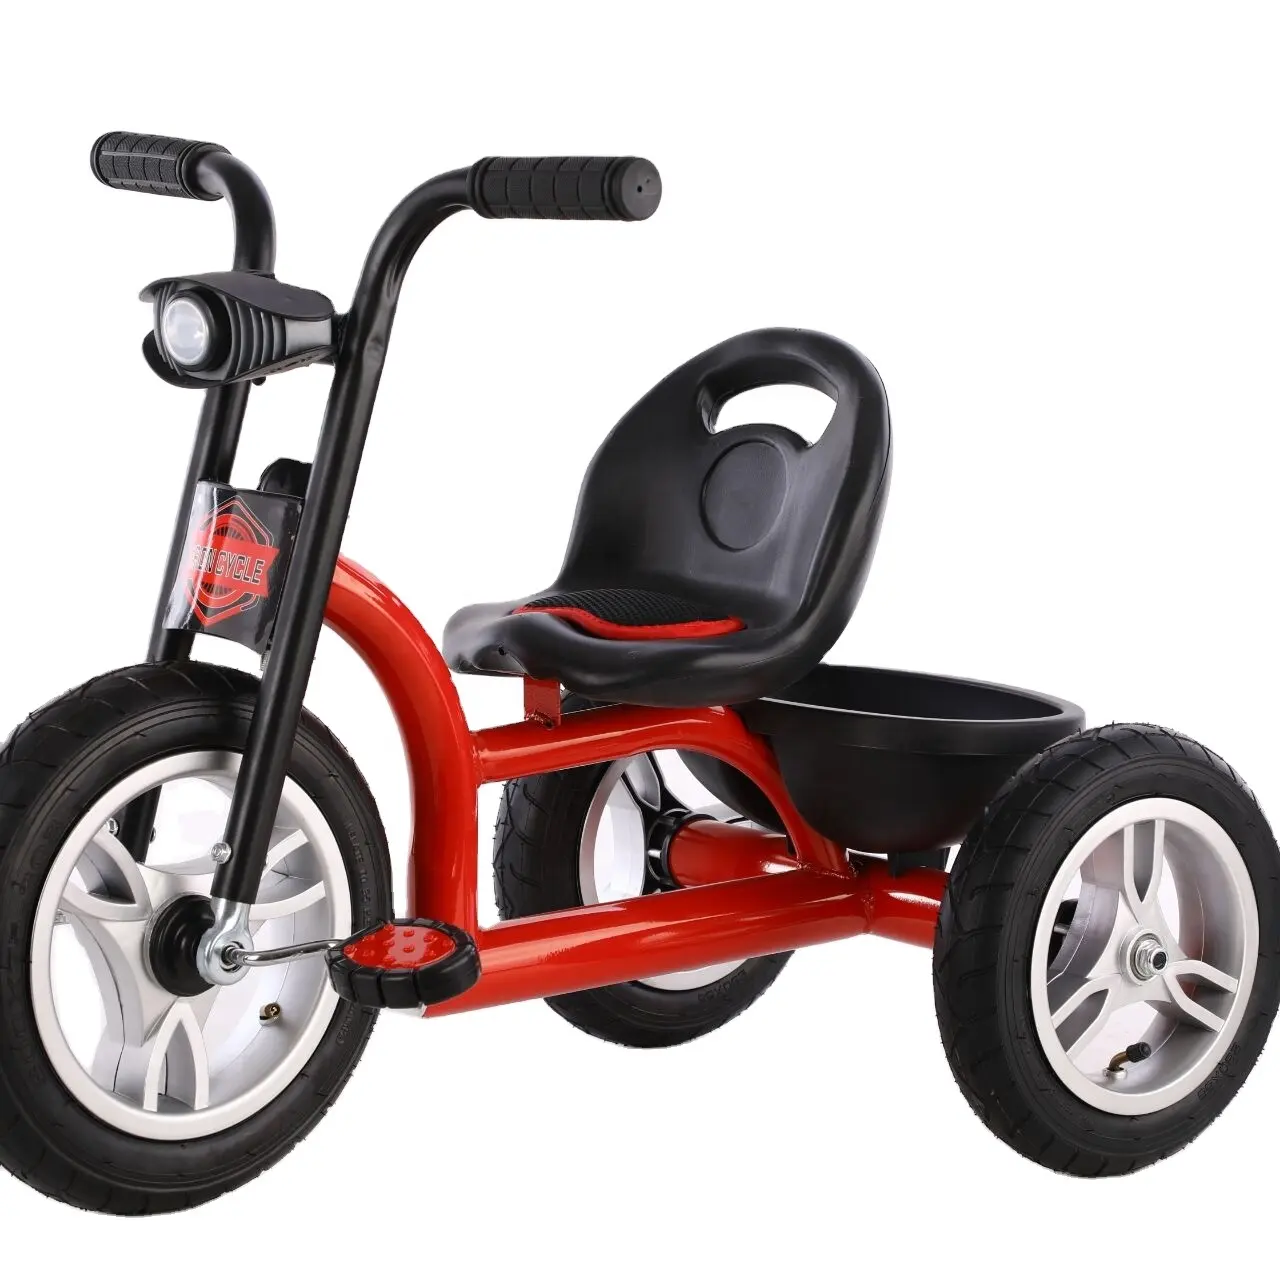 High carbon steel strong frame good welding good quality kids cycle baby strike baby tricycle children ride on car